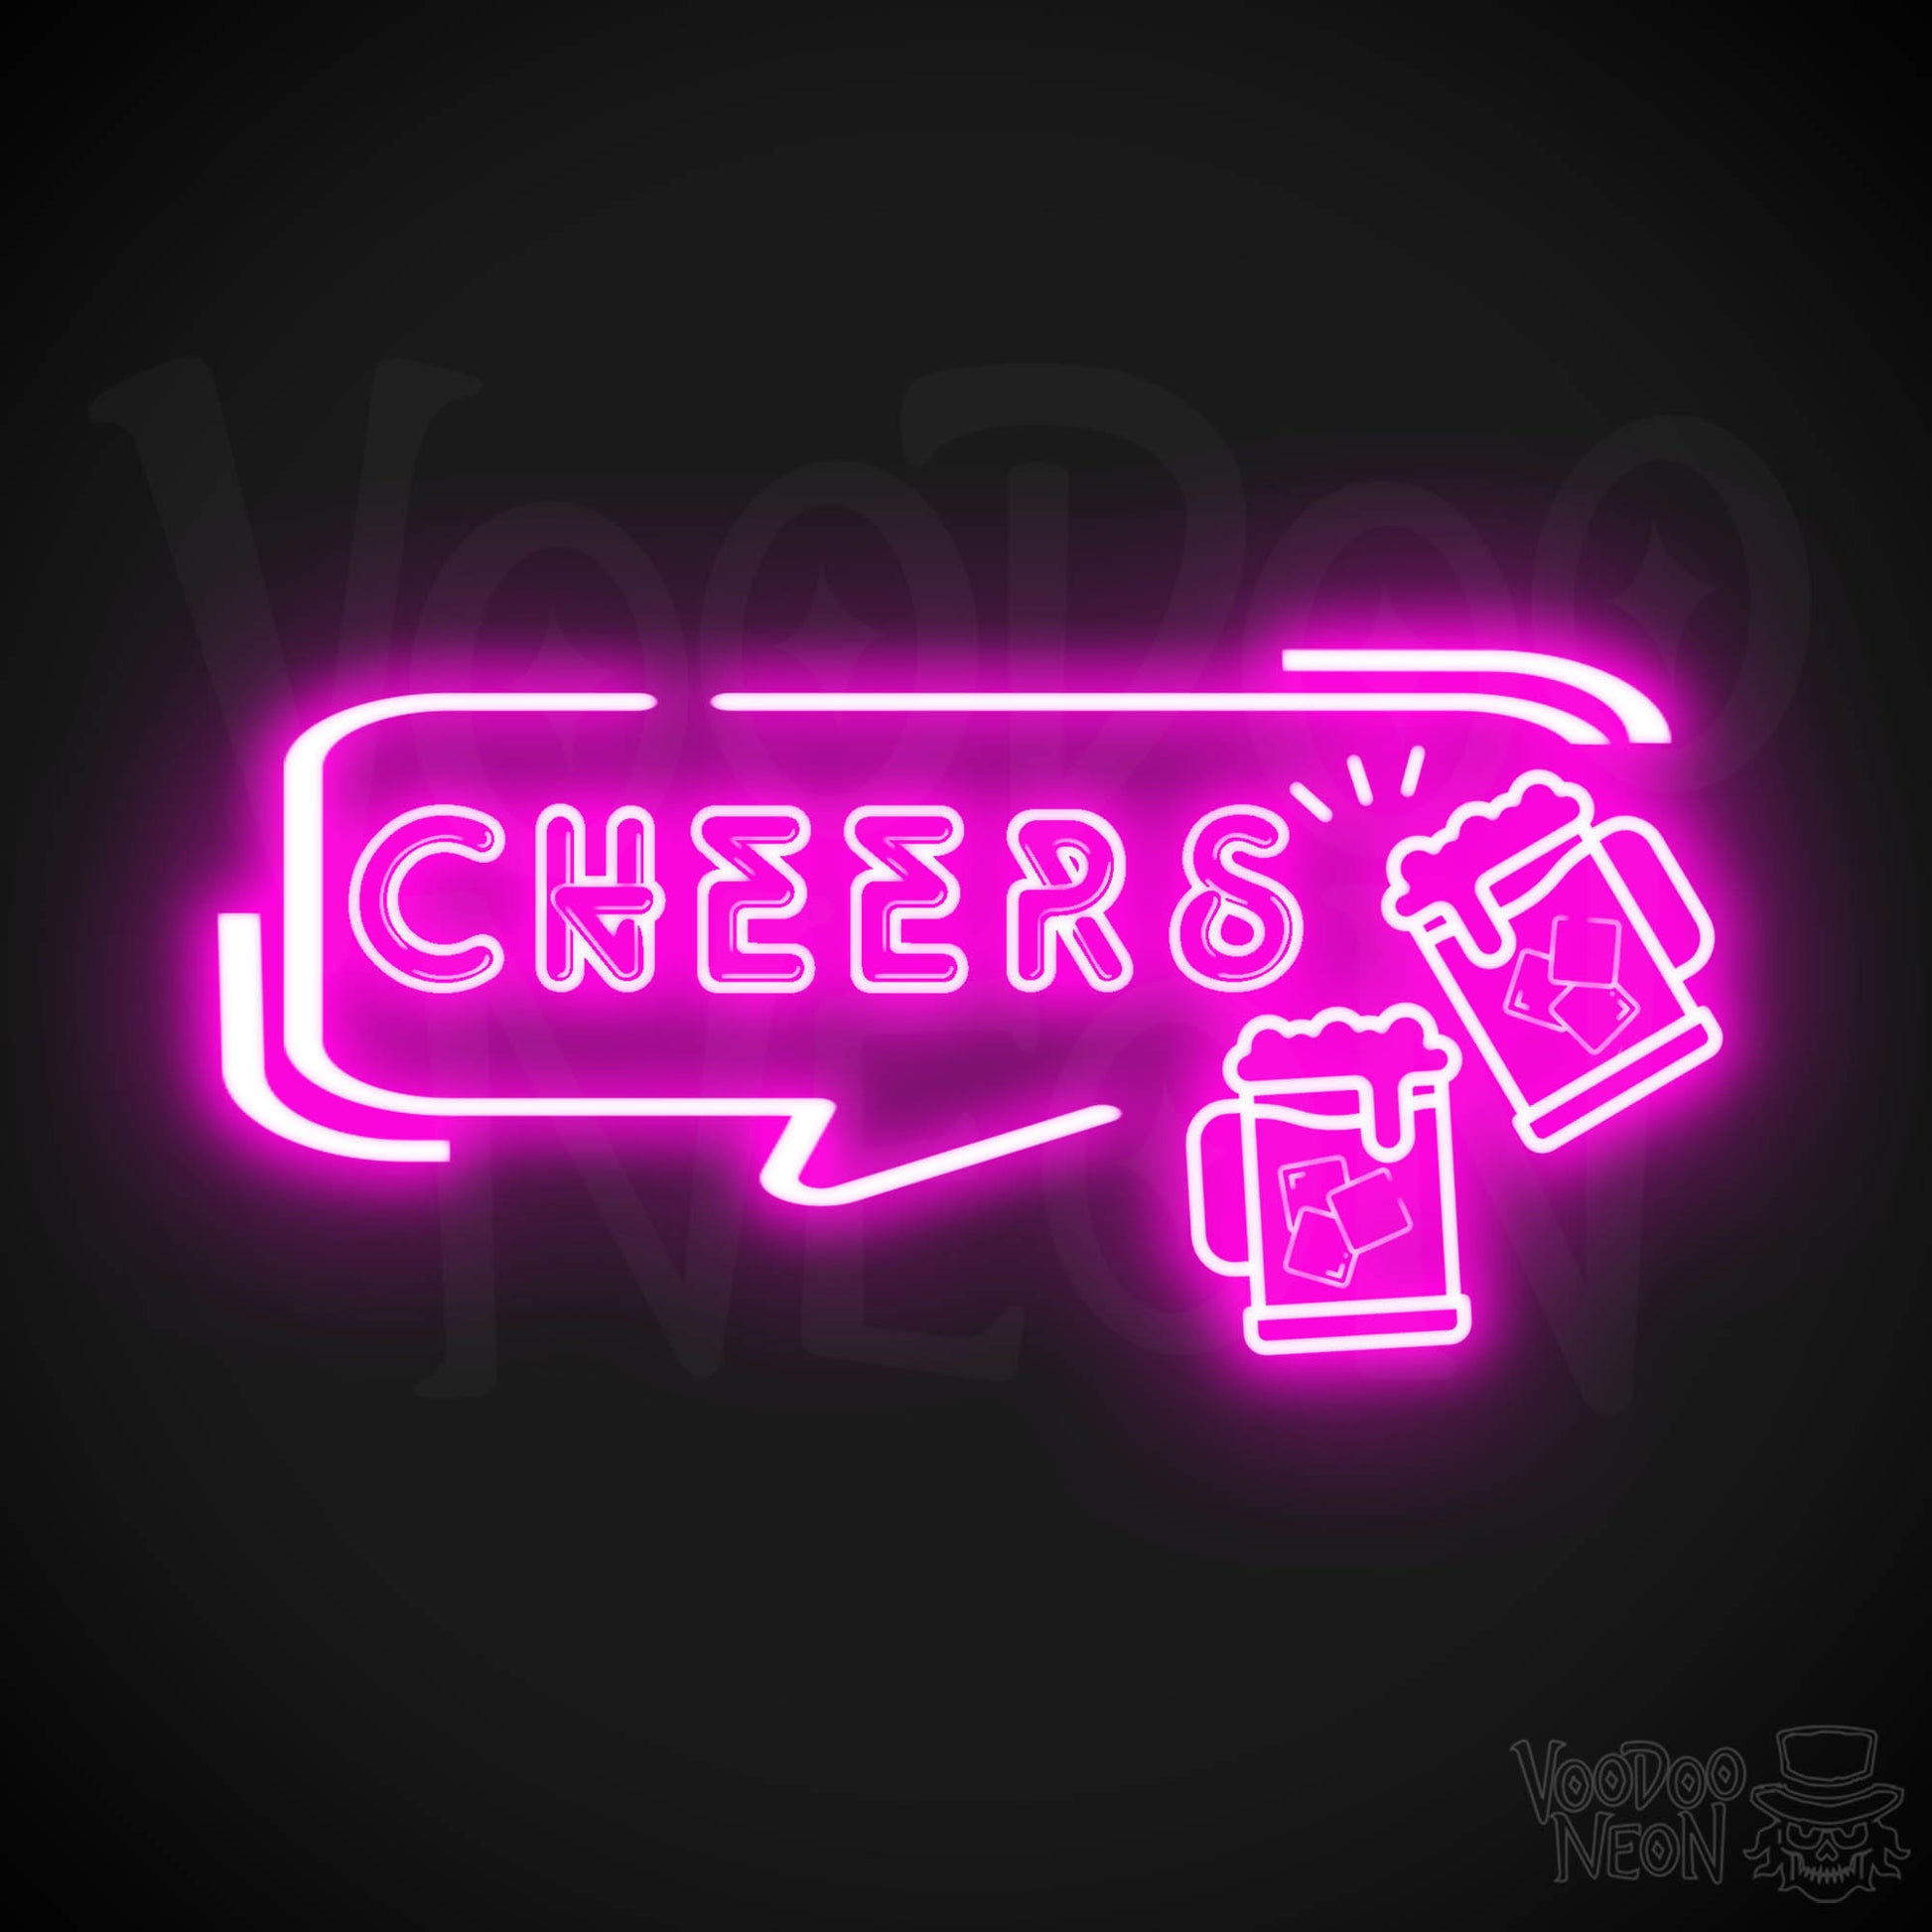 Cheers Neon Sign - Neon Cheers Bar Sign - LED Neon Wall Art - Color Pink